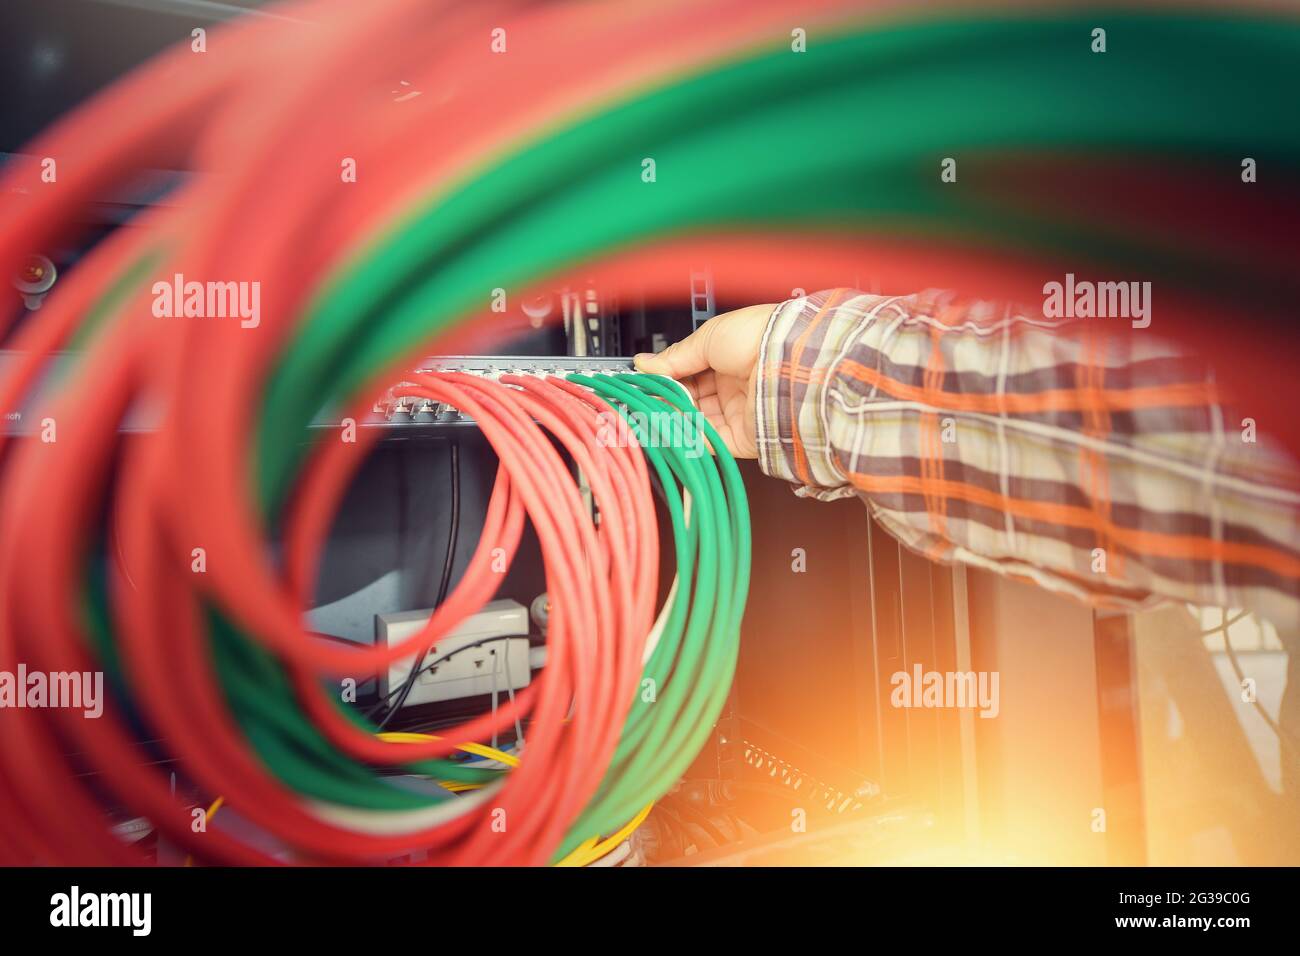 Network Switch And Ethernet Cables, Data Center Concept. Stock Photo